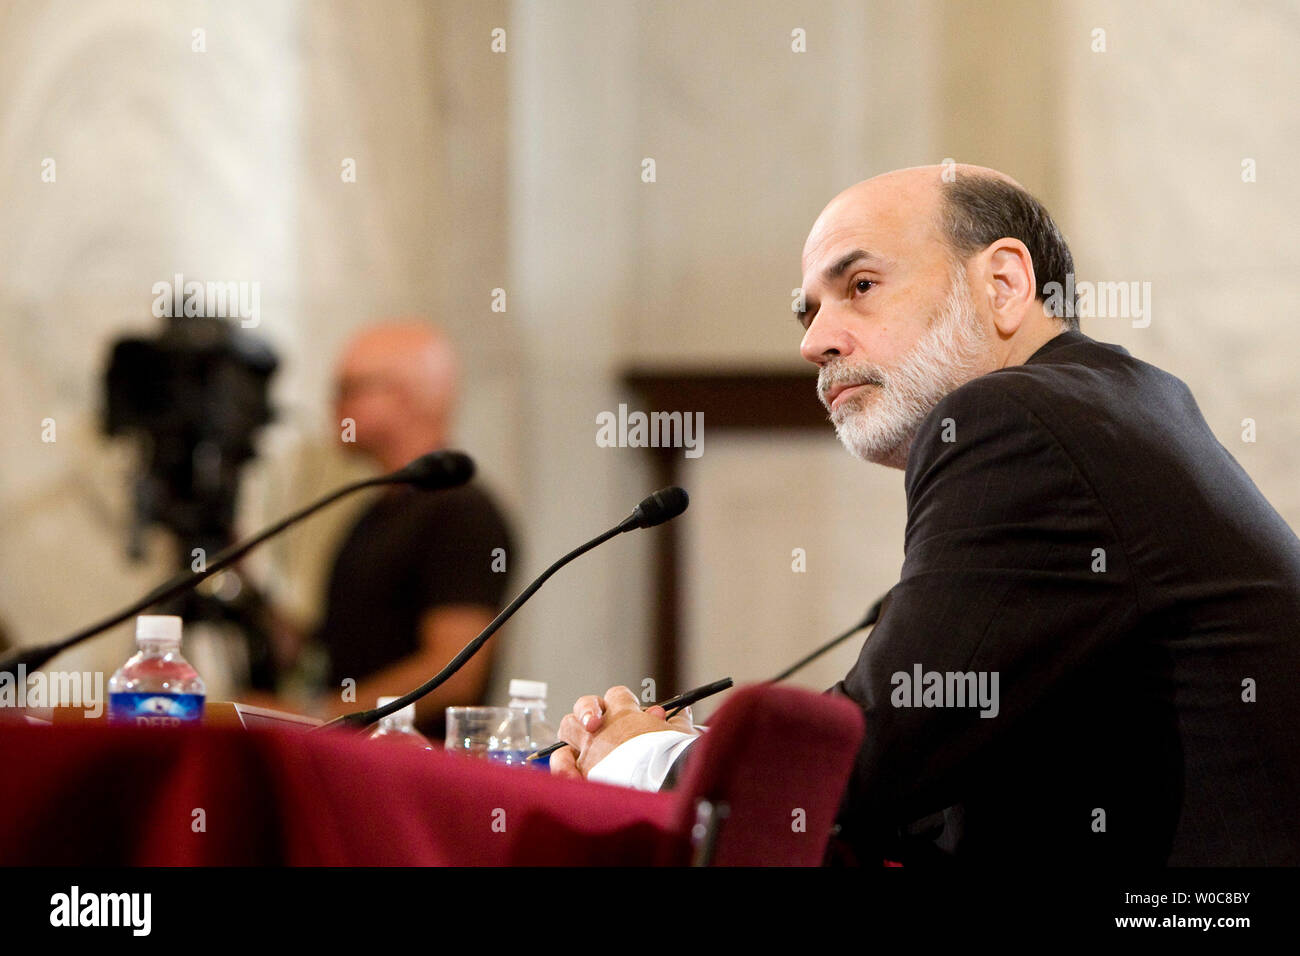 Federal Reserve Board Chairman Ben Bernanke testifies during a Senate Banking, Housing and Urban Affairs Committee hearing on the Federal Reserve's semiannual monetary policy report to Congress on Capitol Hill in Washington on July 15, 2008. (UPI Photo/Patrick D. McDermott) Stock Photo